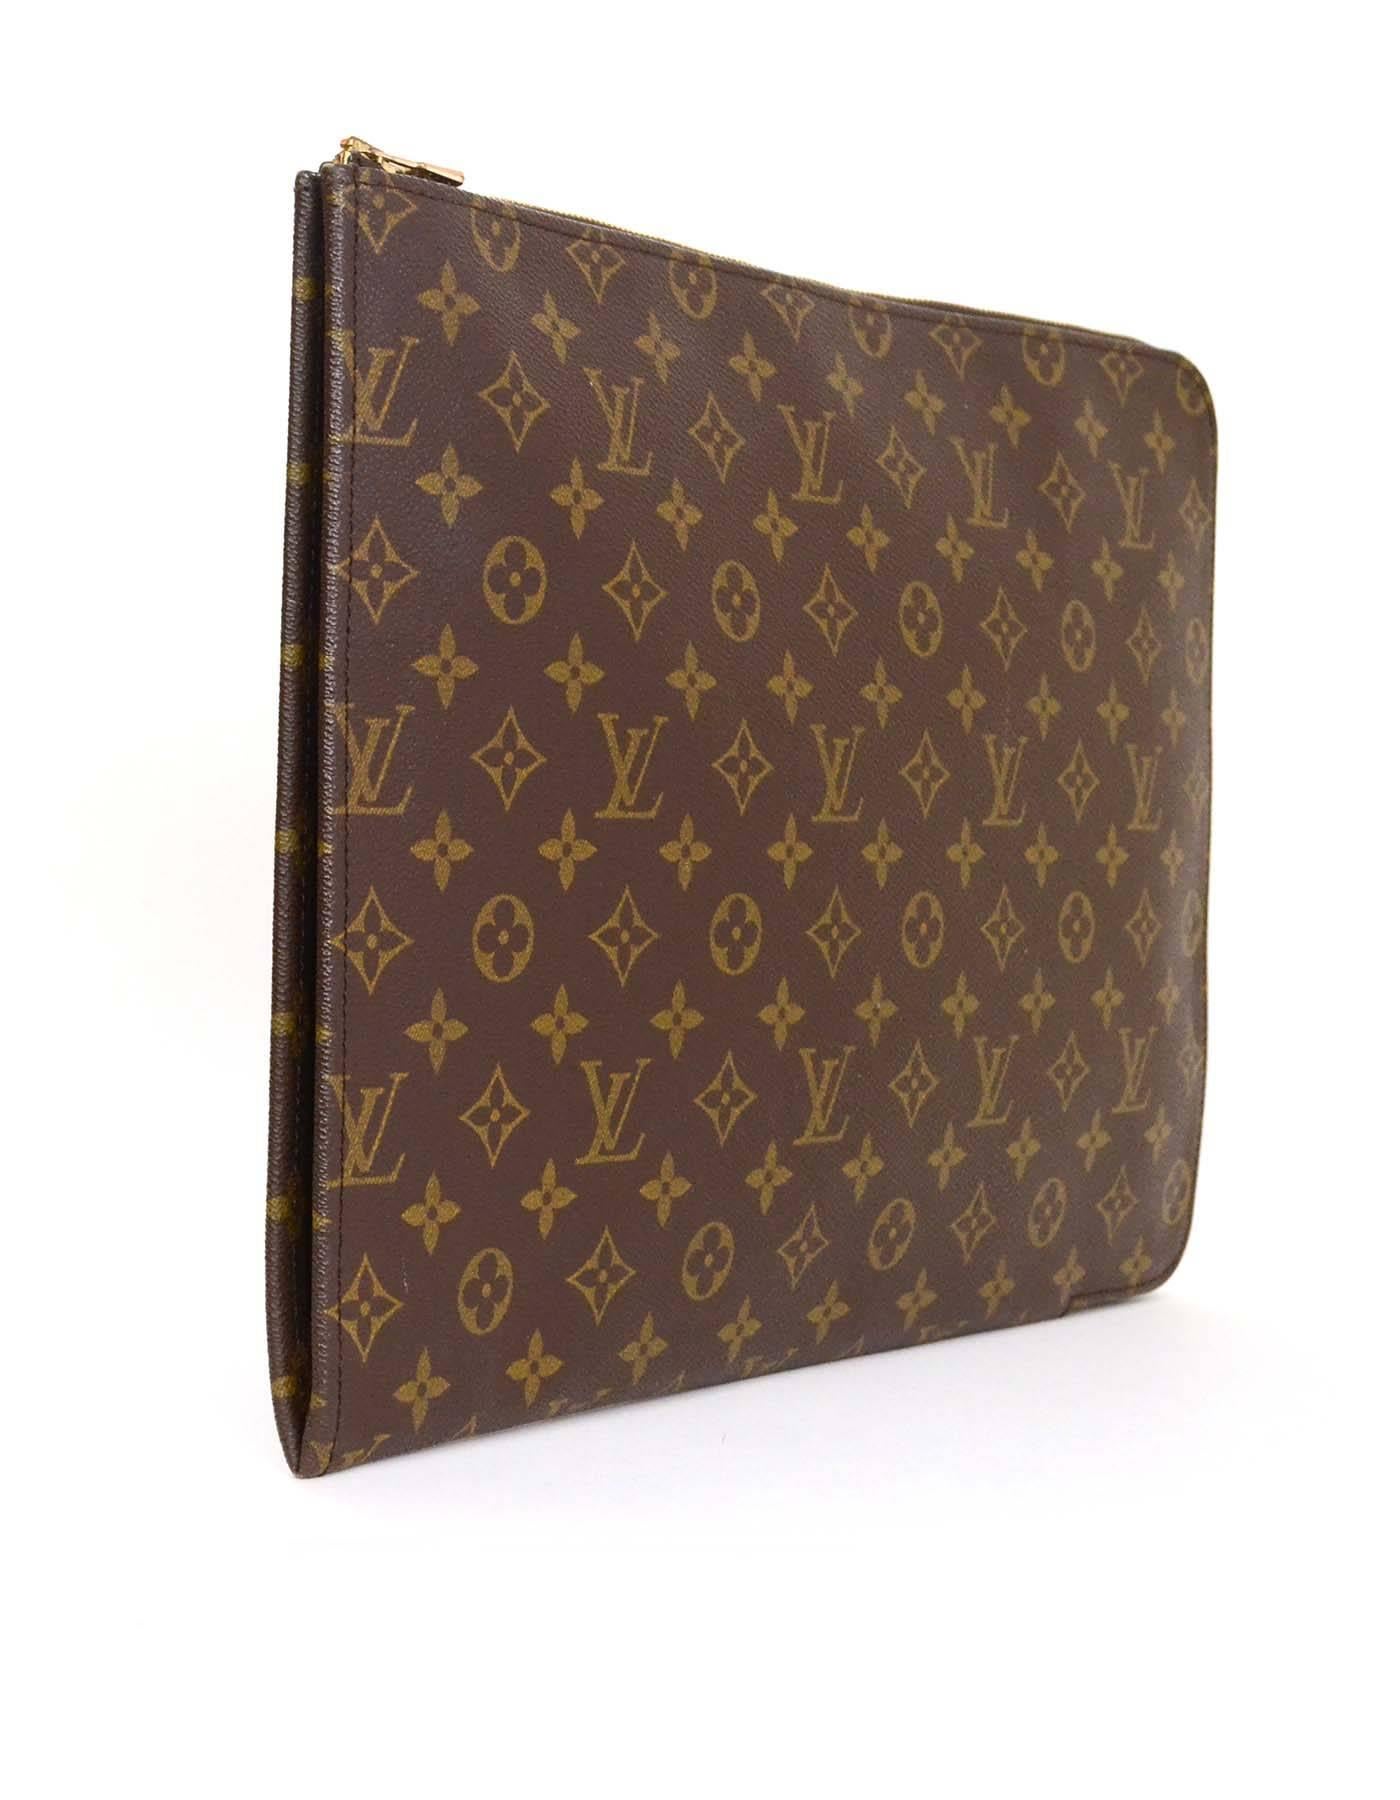 Louis Vuitton Monogram Portfolio Clutch

Made In: France
Year of Production: 1990
Color: Brown
Hardware: Goldtone
Materials: Coated canvas
Lining: Coated canvas
Closure/Opening: Zip across closure
Exterior Pockets: None
Interior Pockets: